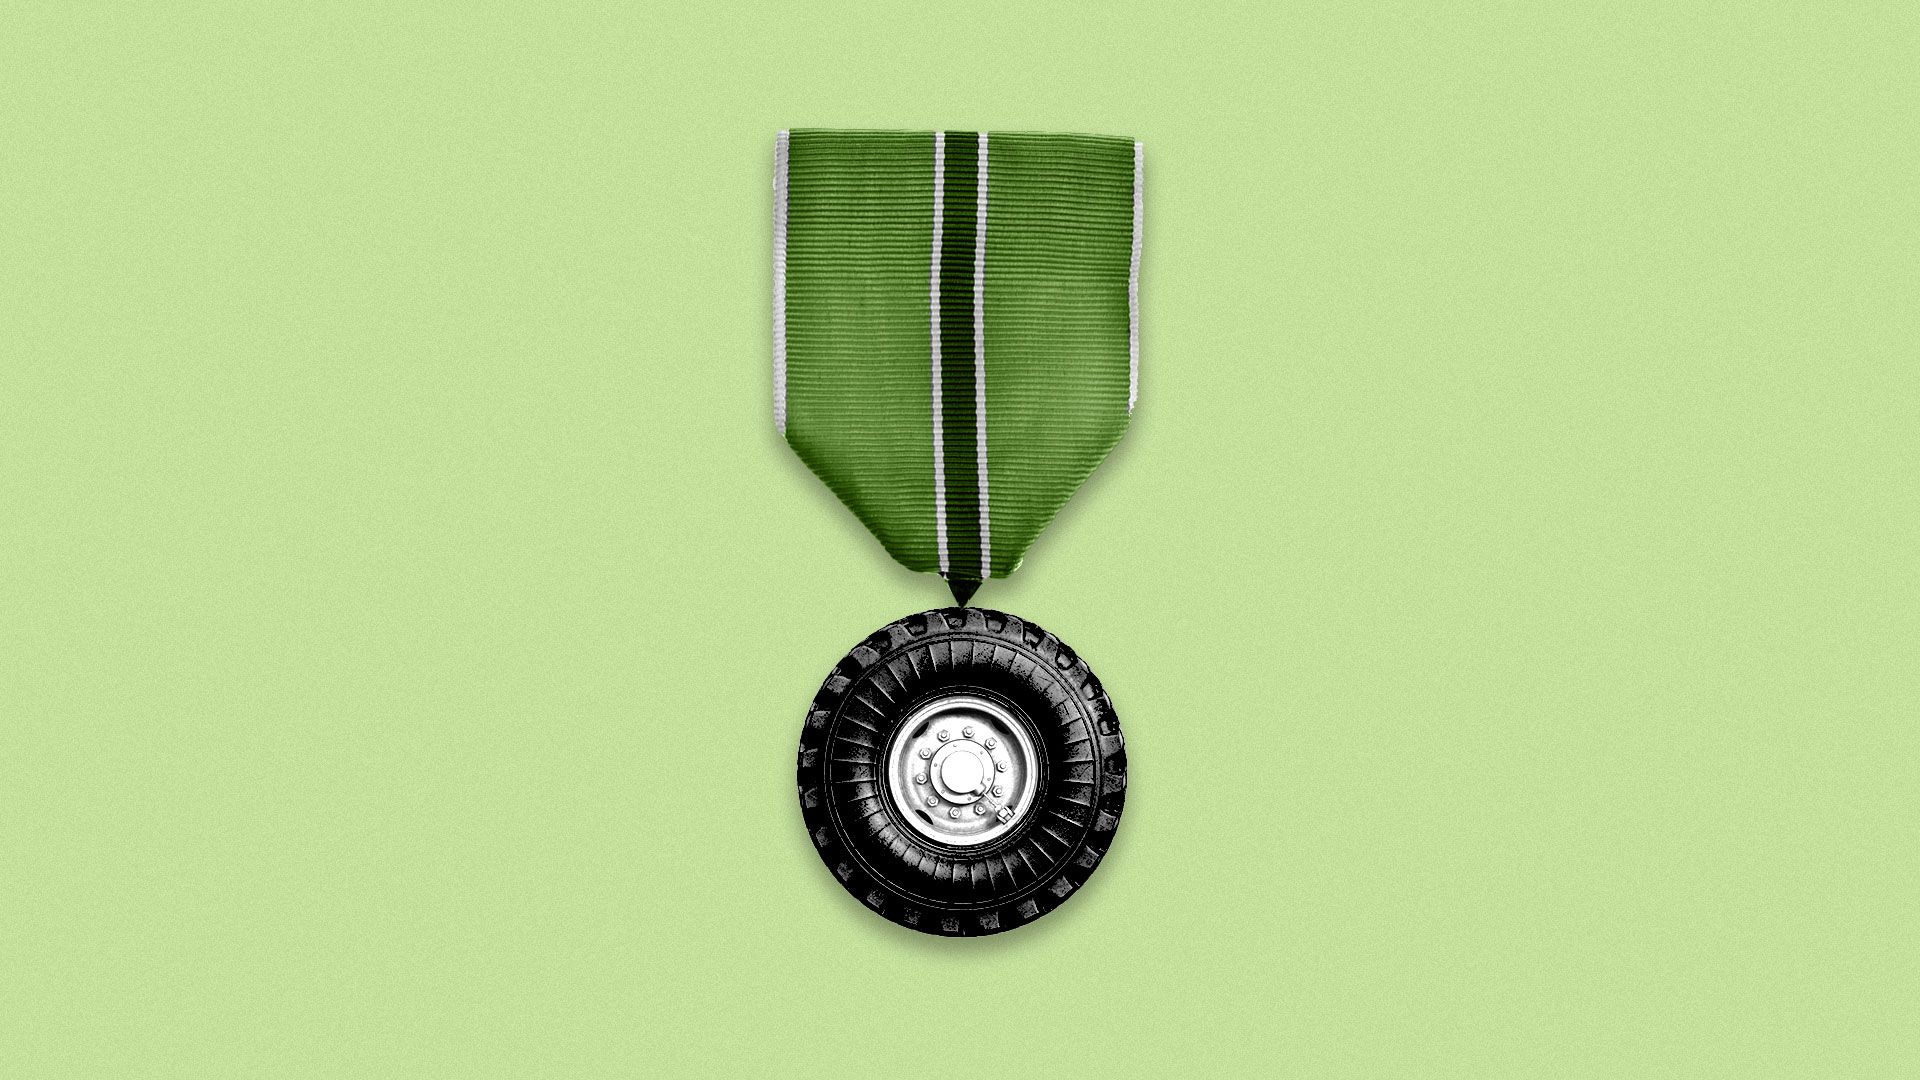 Illustration of a hanging military medal with a tire as the medal.